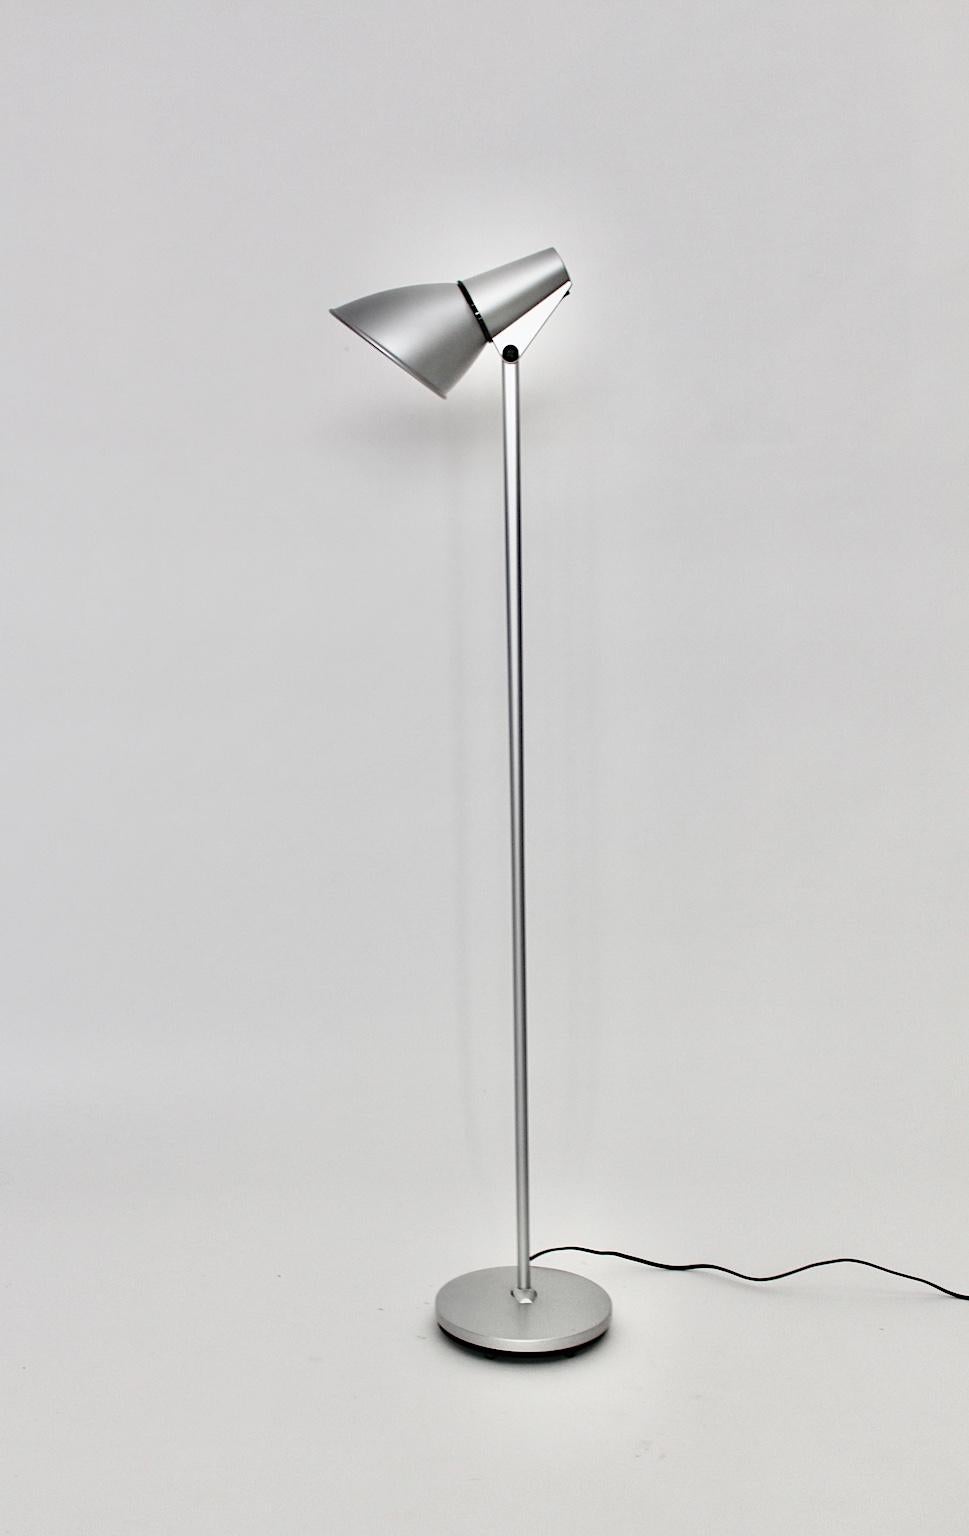 Modern vintage silver lacquered aluminum and steel floor lamp designed by Hannes Wettstein 1996 for Artemide Pregnana Milanese, Italy.
The shade is adjustable in all directions. Also it is labeled, while the switch on / off sits at the shade.
The